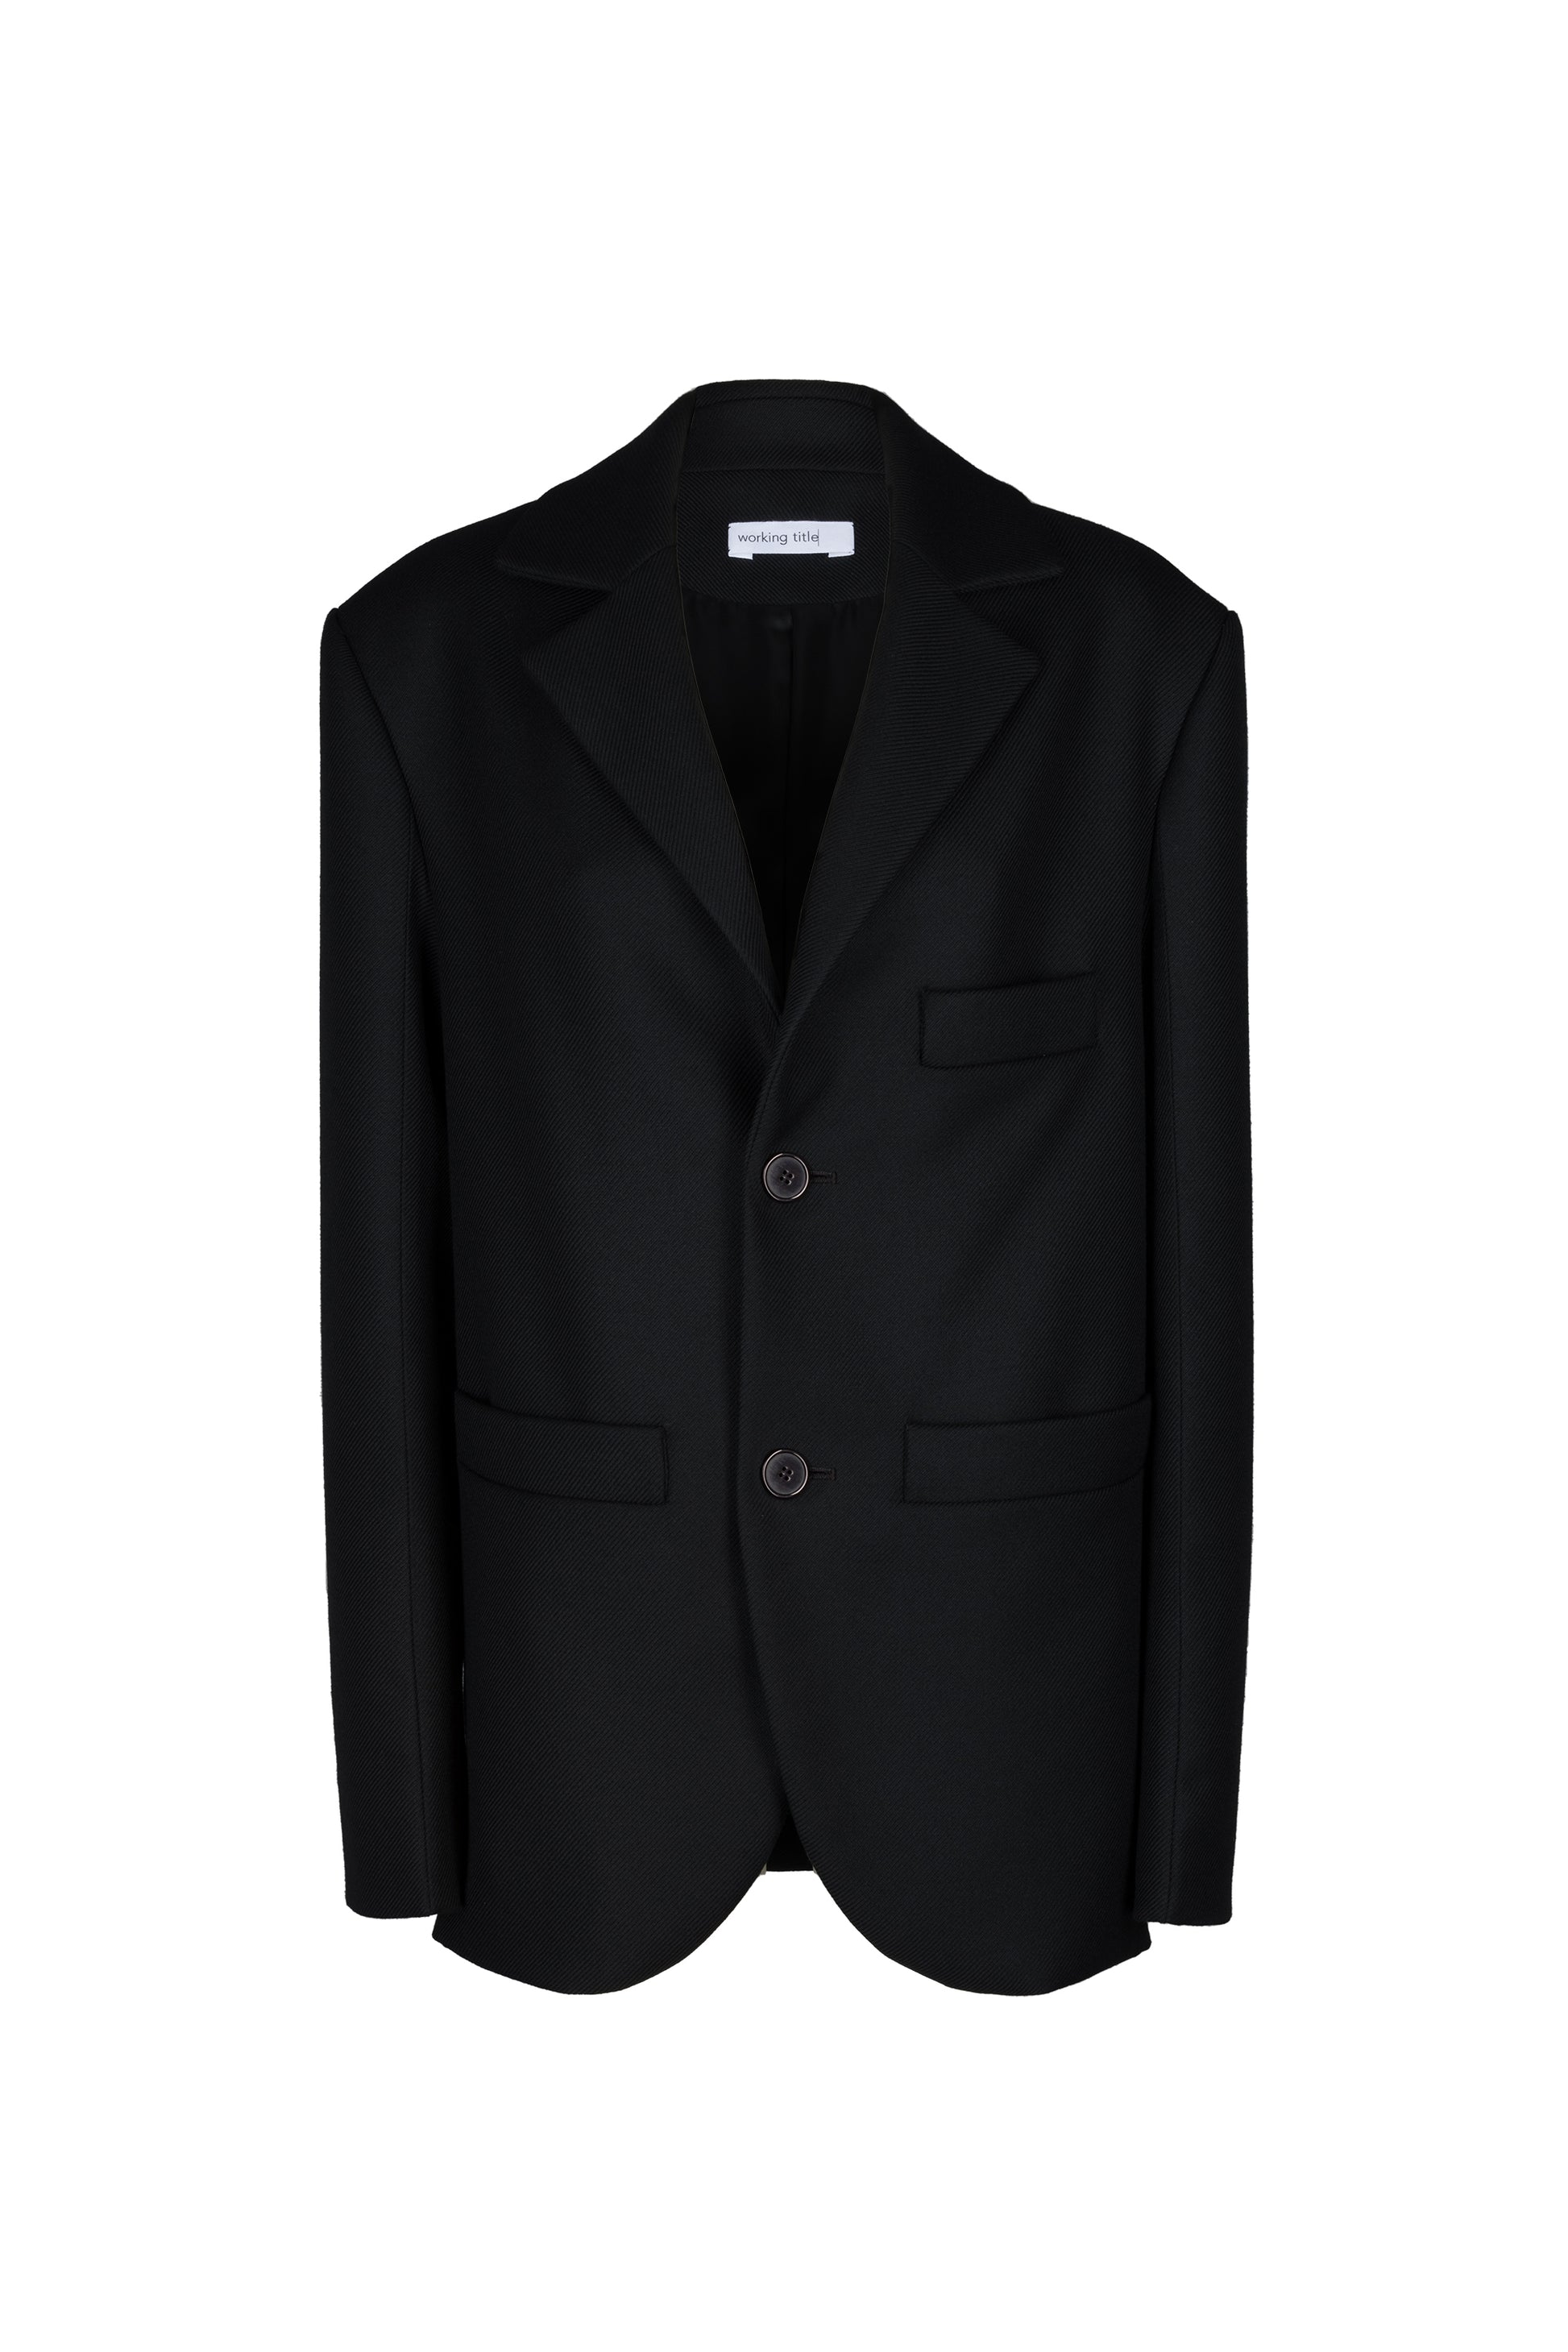 Classic black oversized unisex blazer made from Italian wool, featuring notched lapels and a double-button closure for a timeless and sophisticated look.